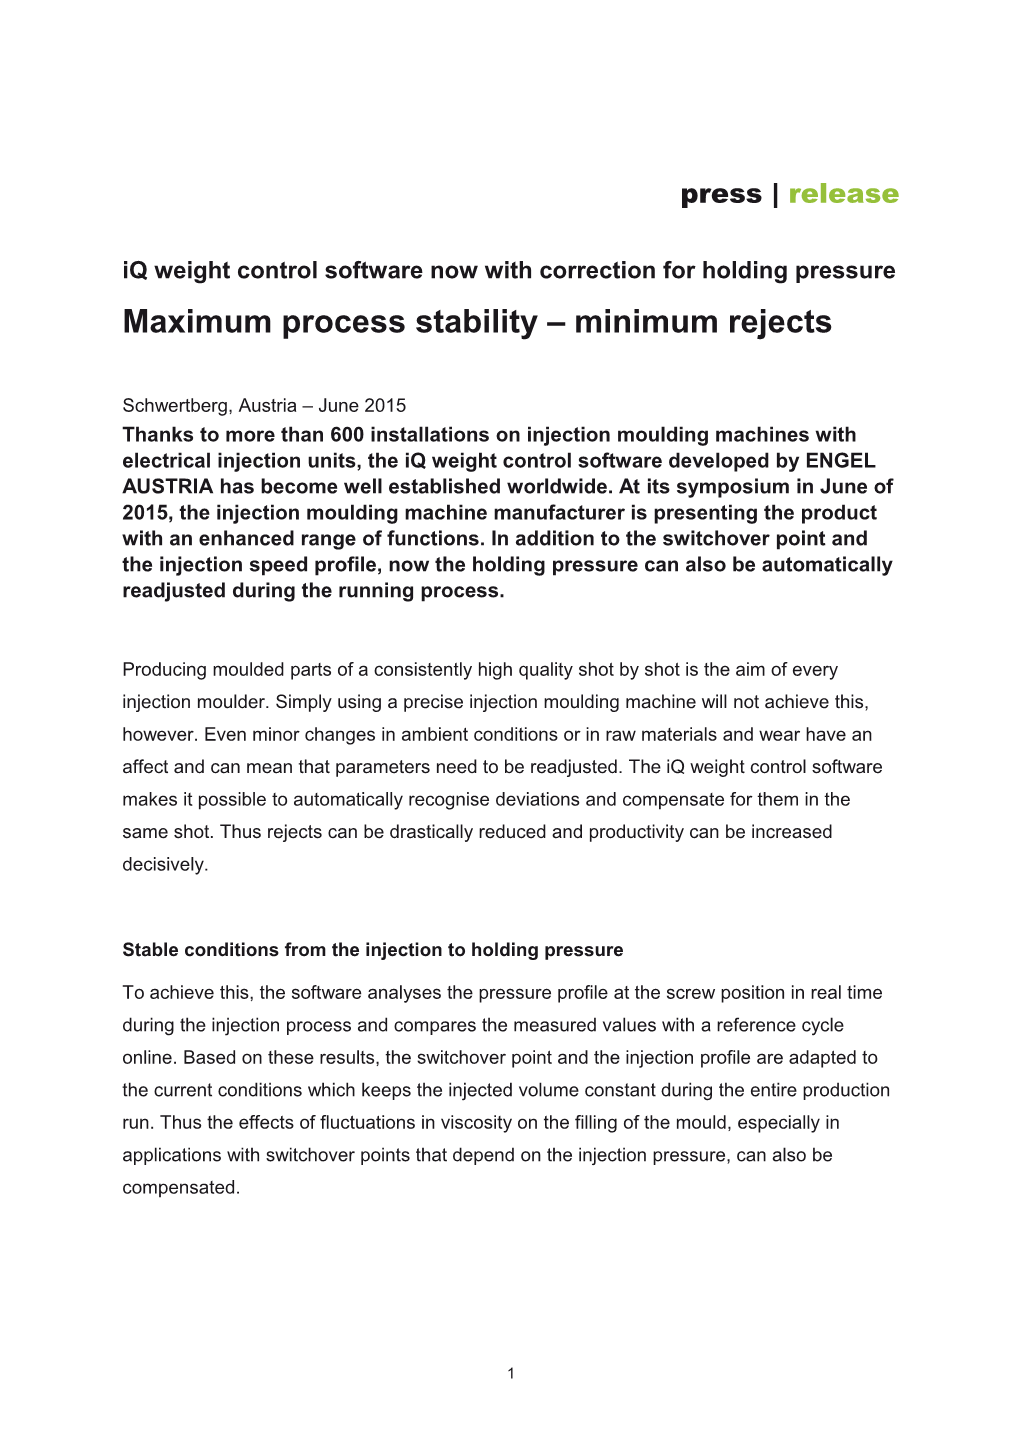 Iq Weight Control Software Now with Correction for Holding Pressure